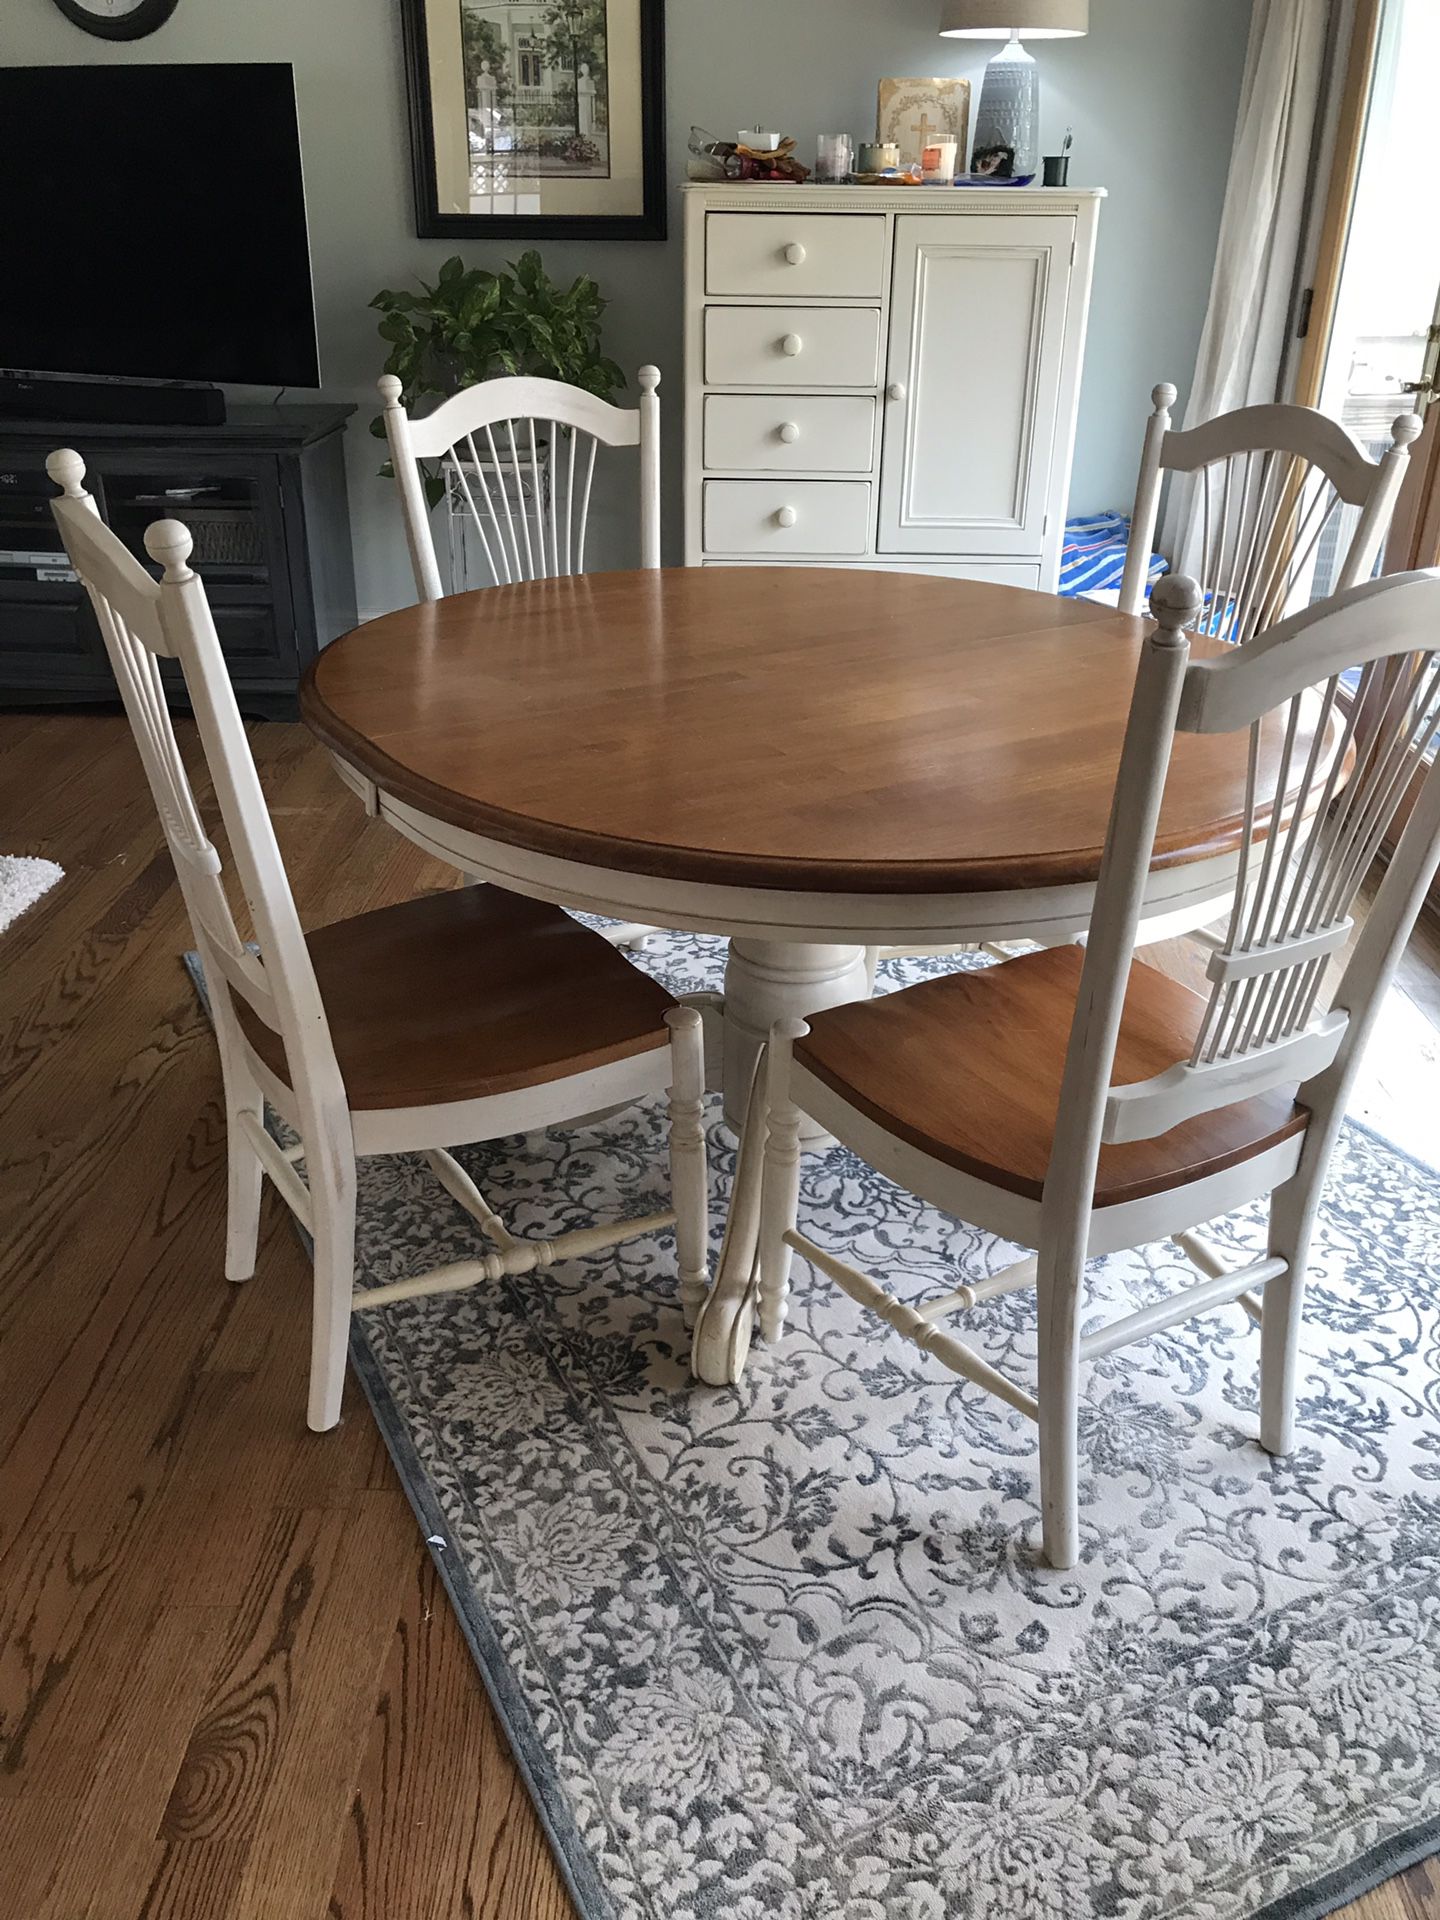 Oak pedestal dining table with cream accents w/ 6 chairs